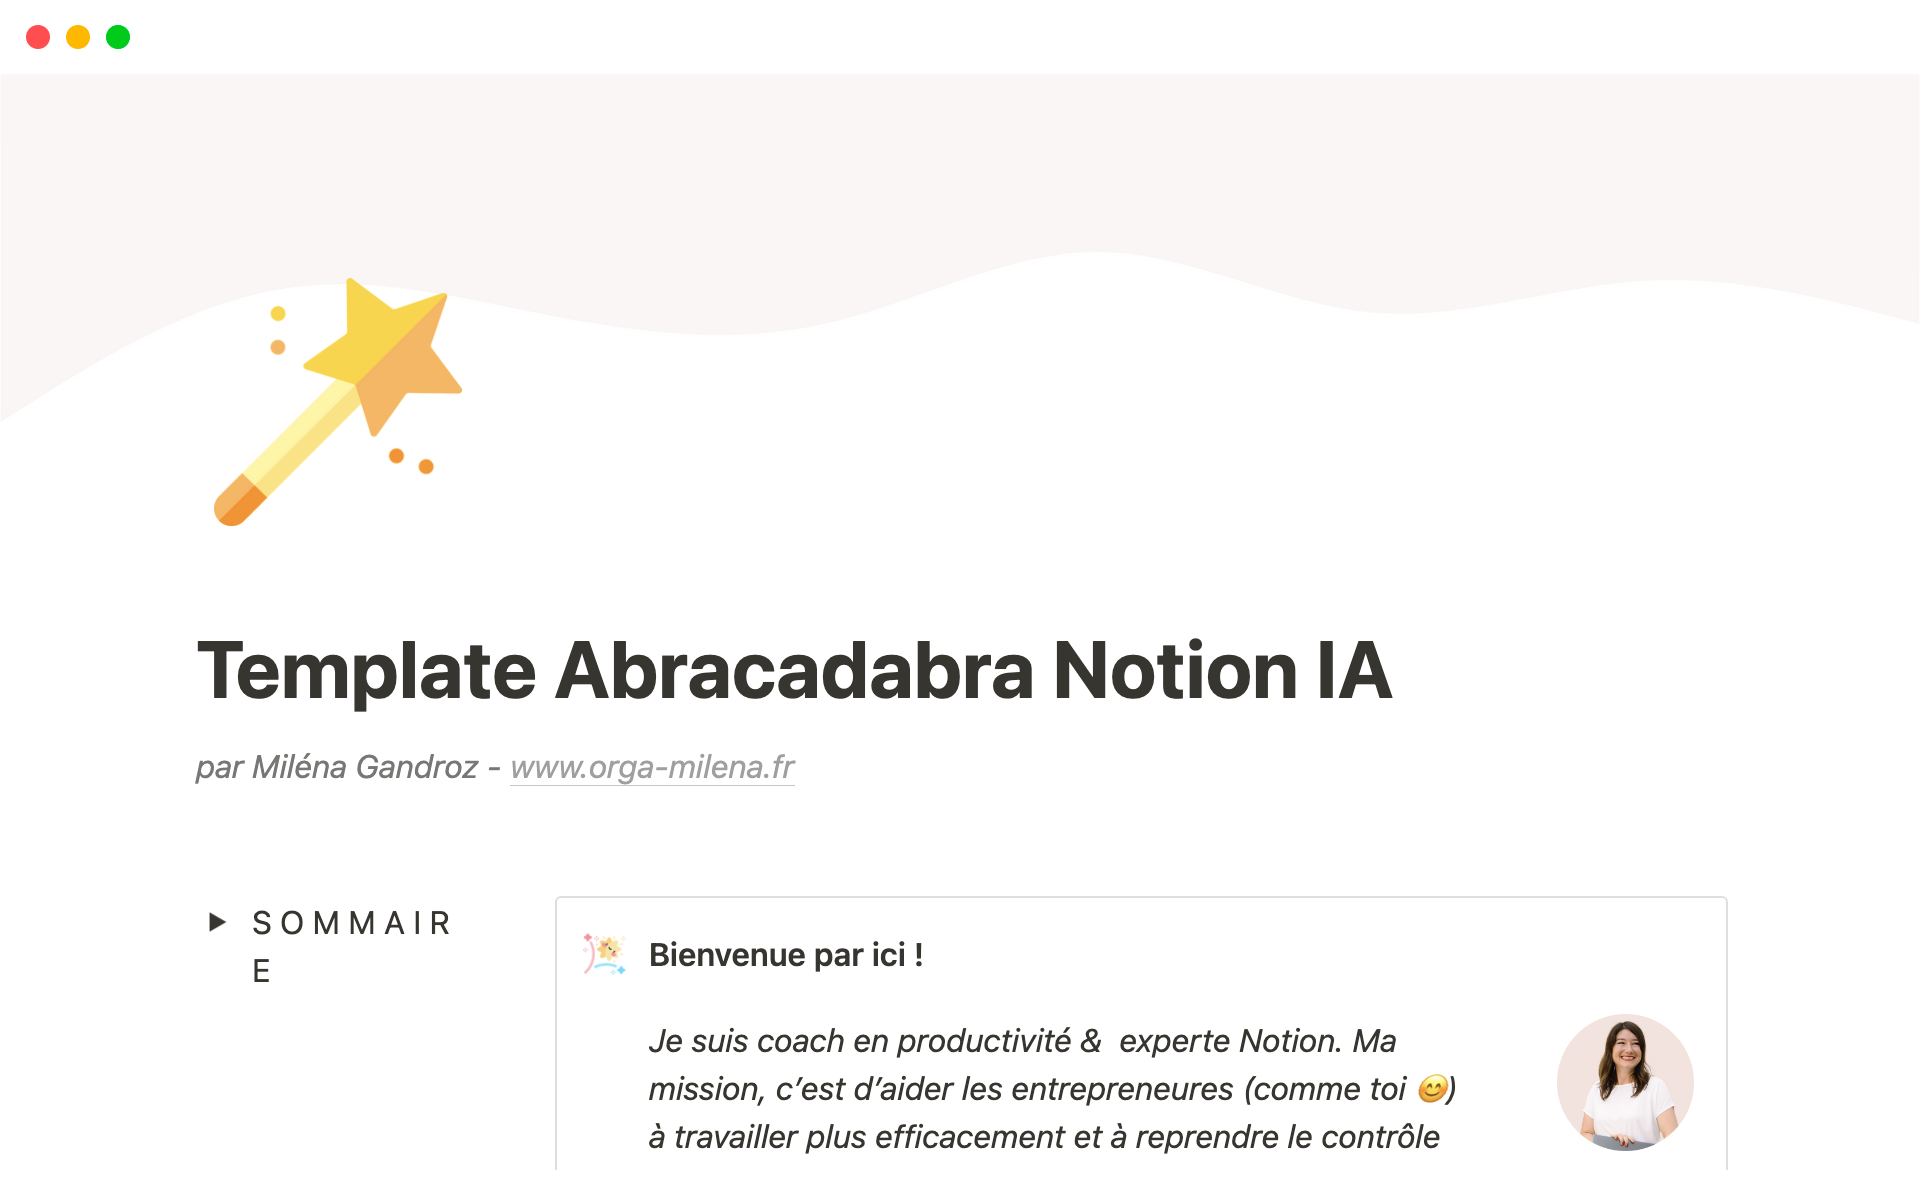 A template preview for Abracadabra Notion IA